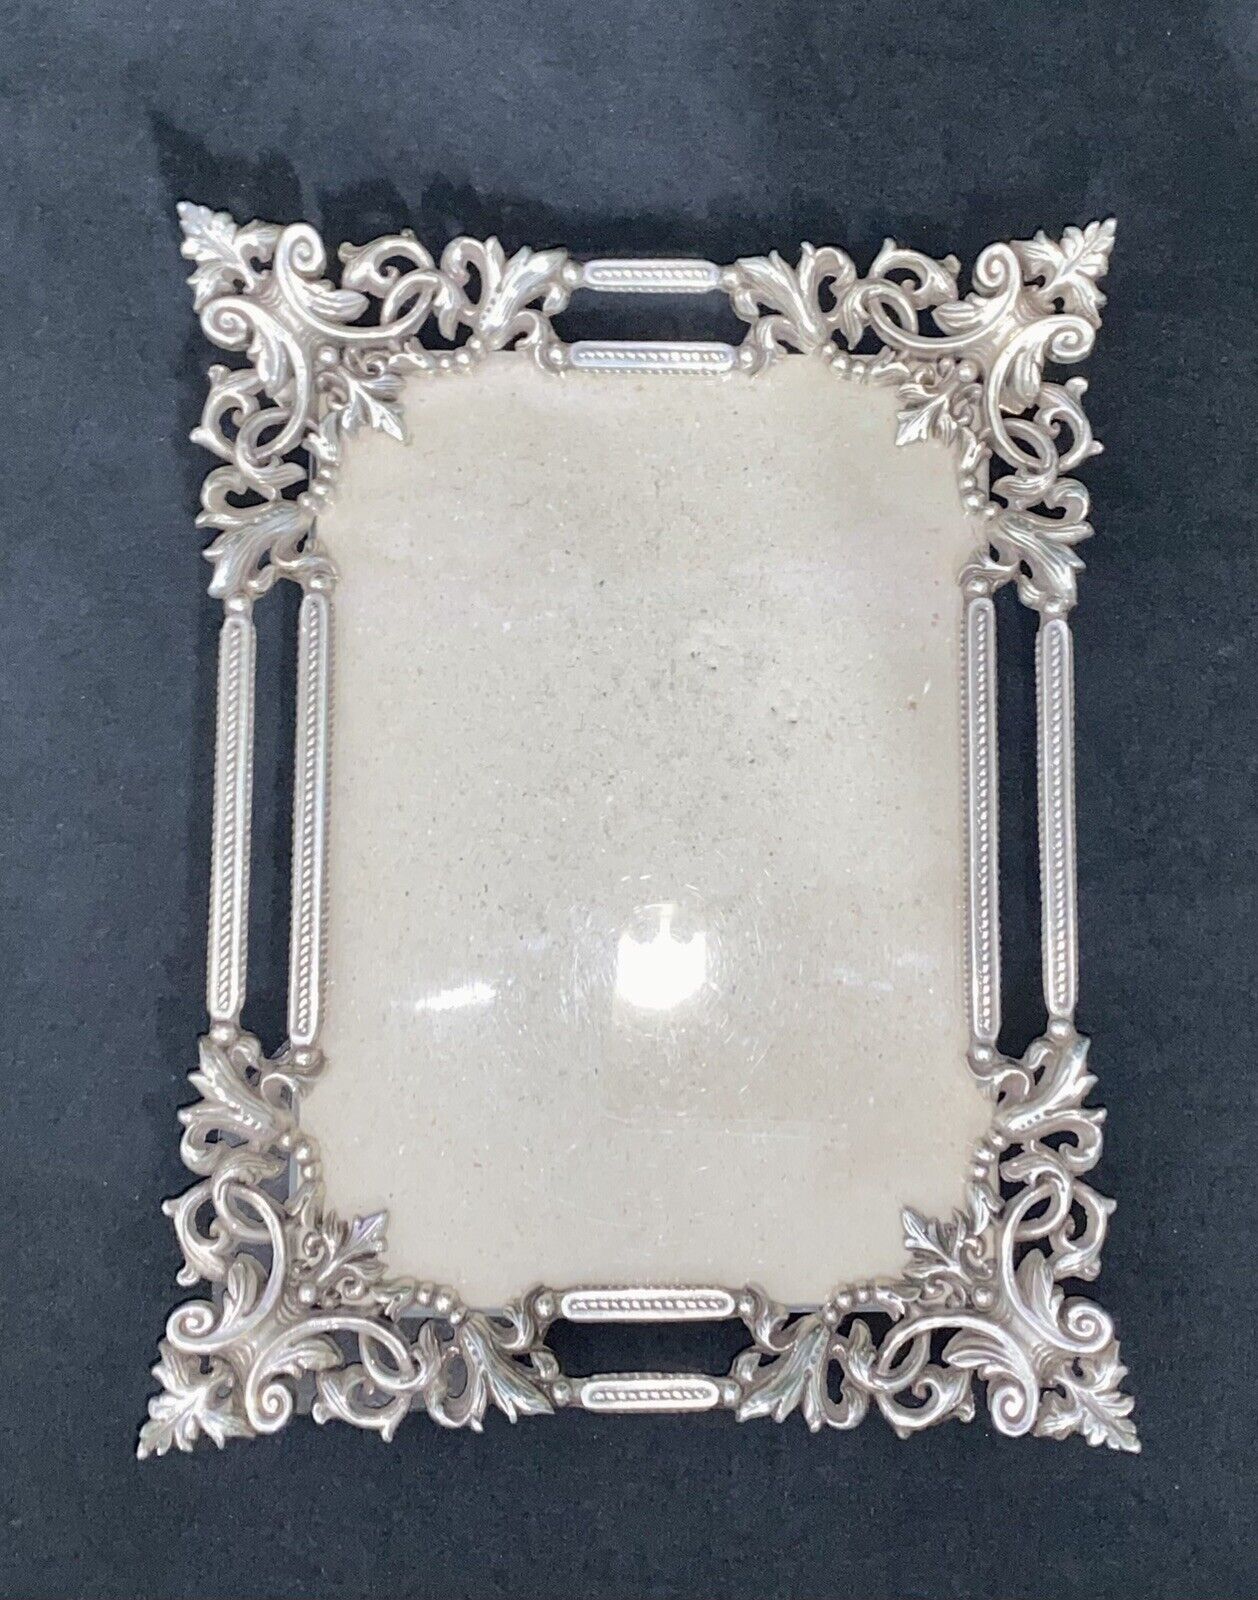 Vintage BRIGHTON Ornate Silver Plated Picture Frame 5x6 Taiwan Heavy Pierced